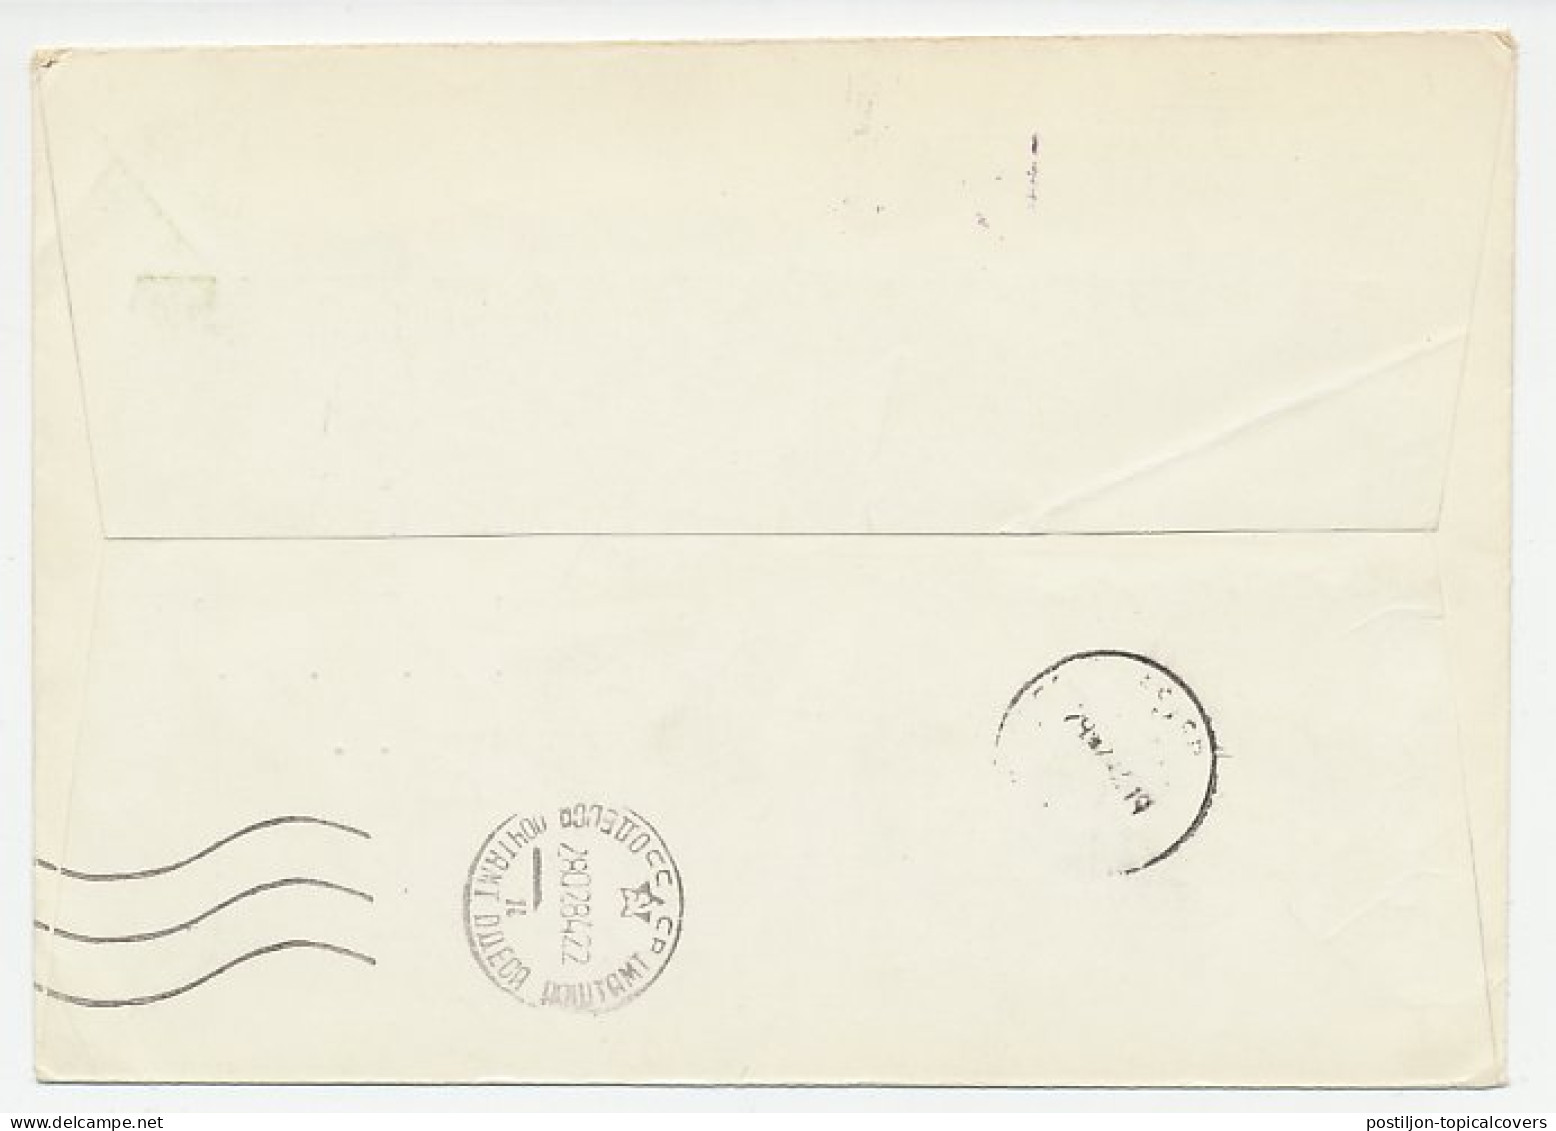 Registered Cover / Postmark Soviet Union 1984 Arctic Expedition - Arctic Expeditions